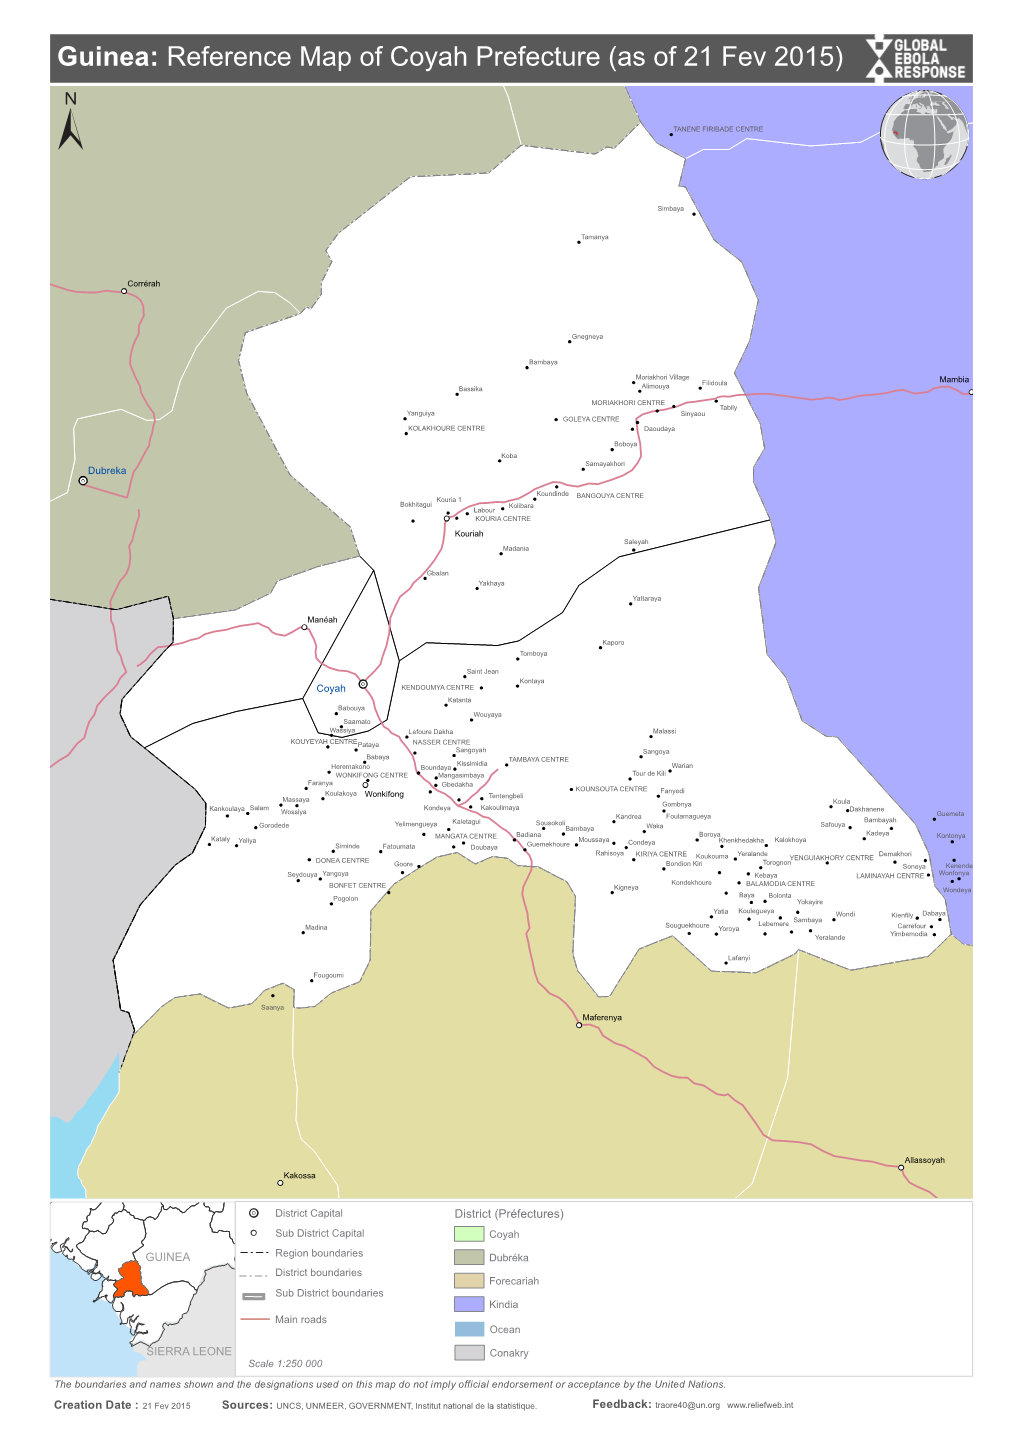 Guinea: Reference Map of Coyah Prefecture (As of 21 Fev 2015)